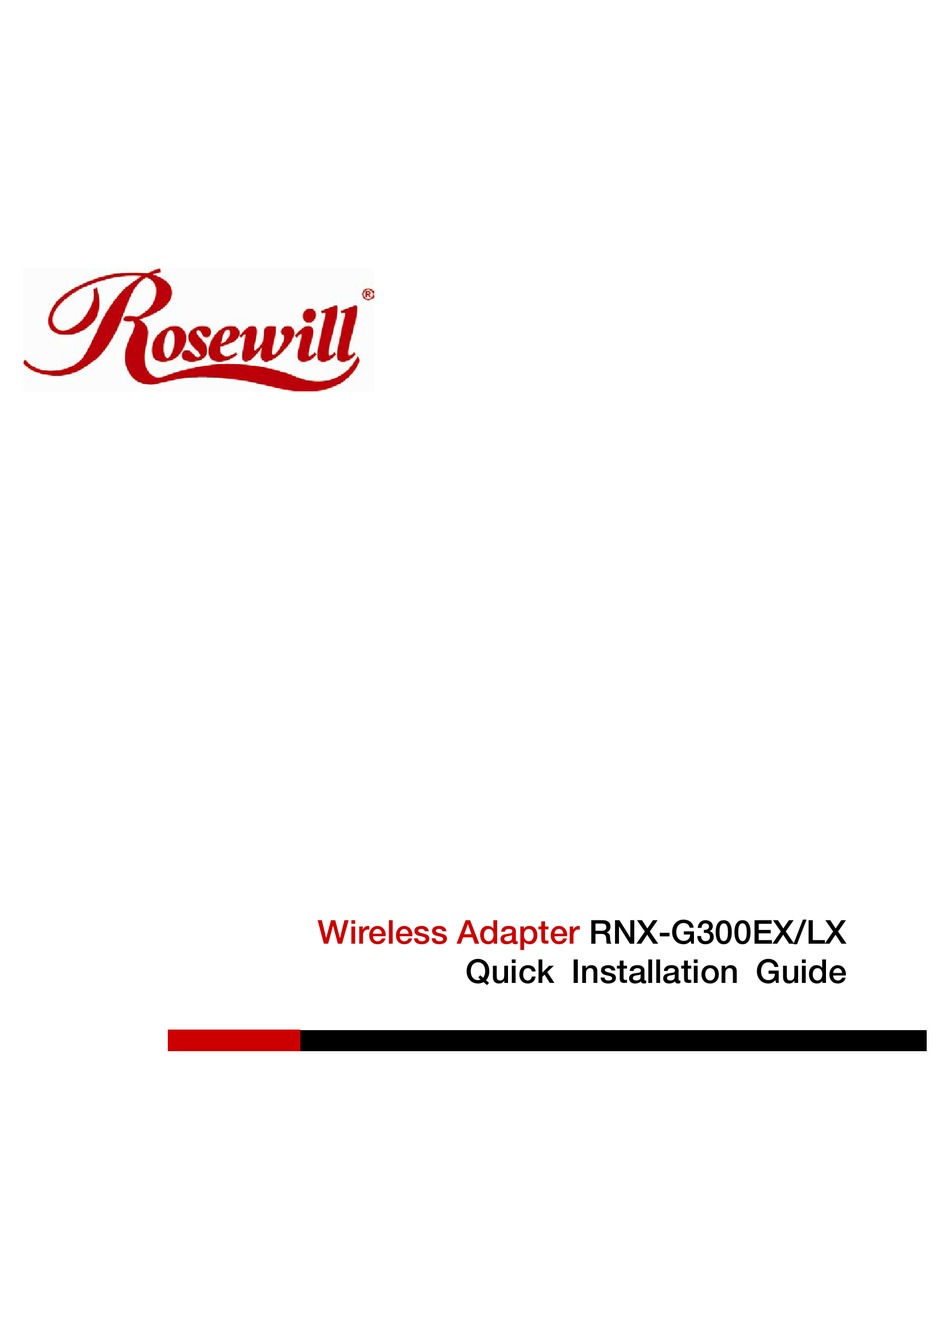 rosewill wireless adapter drivers